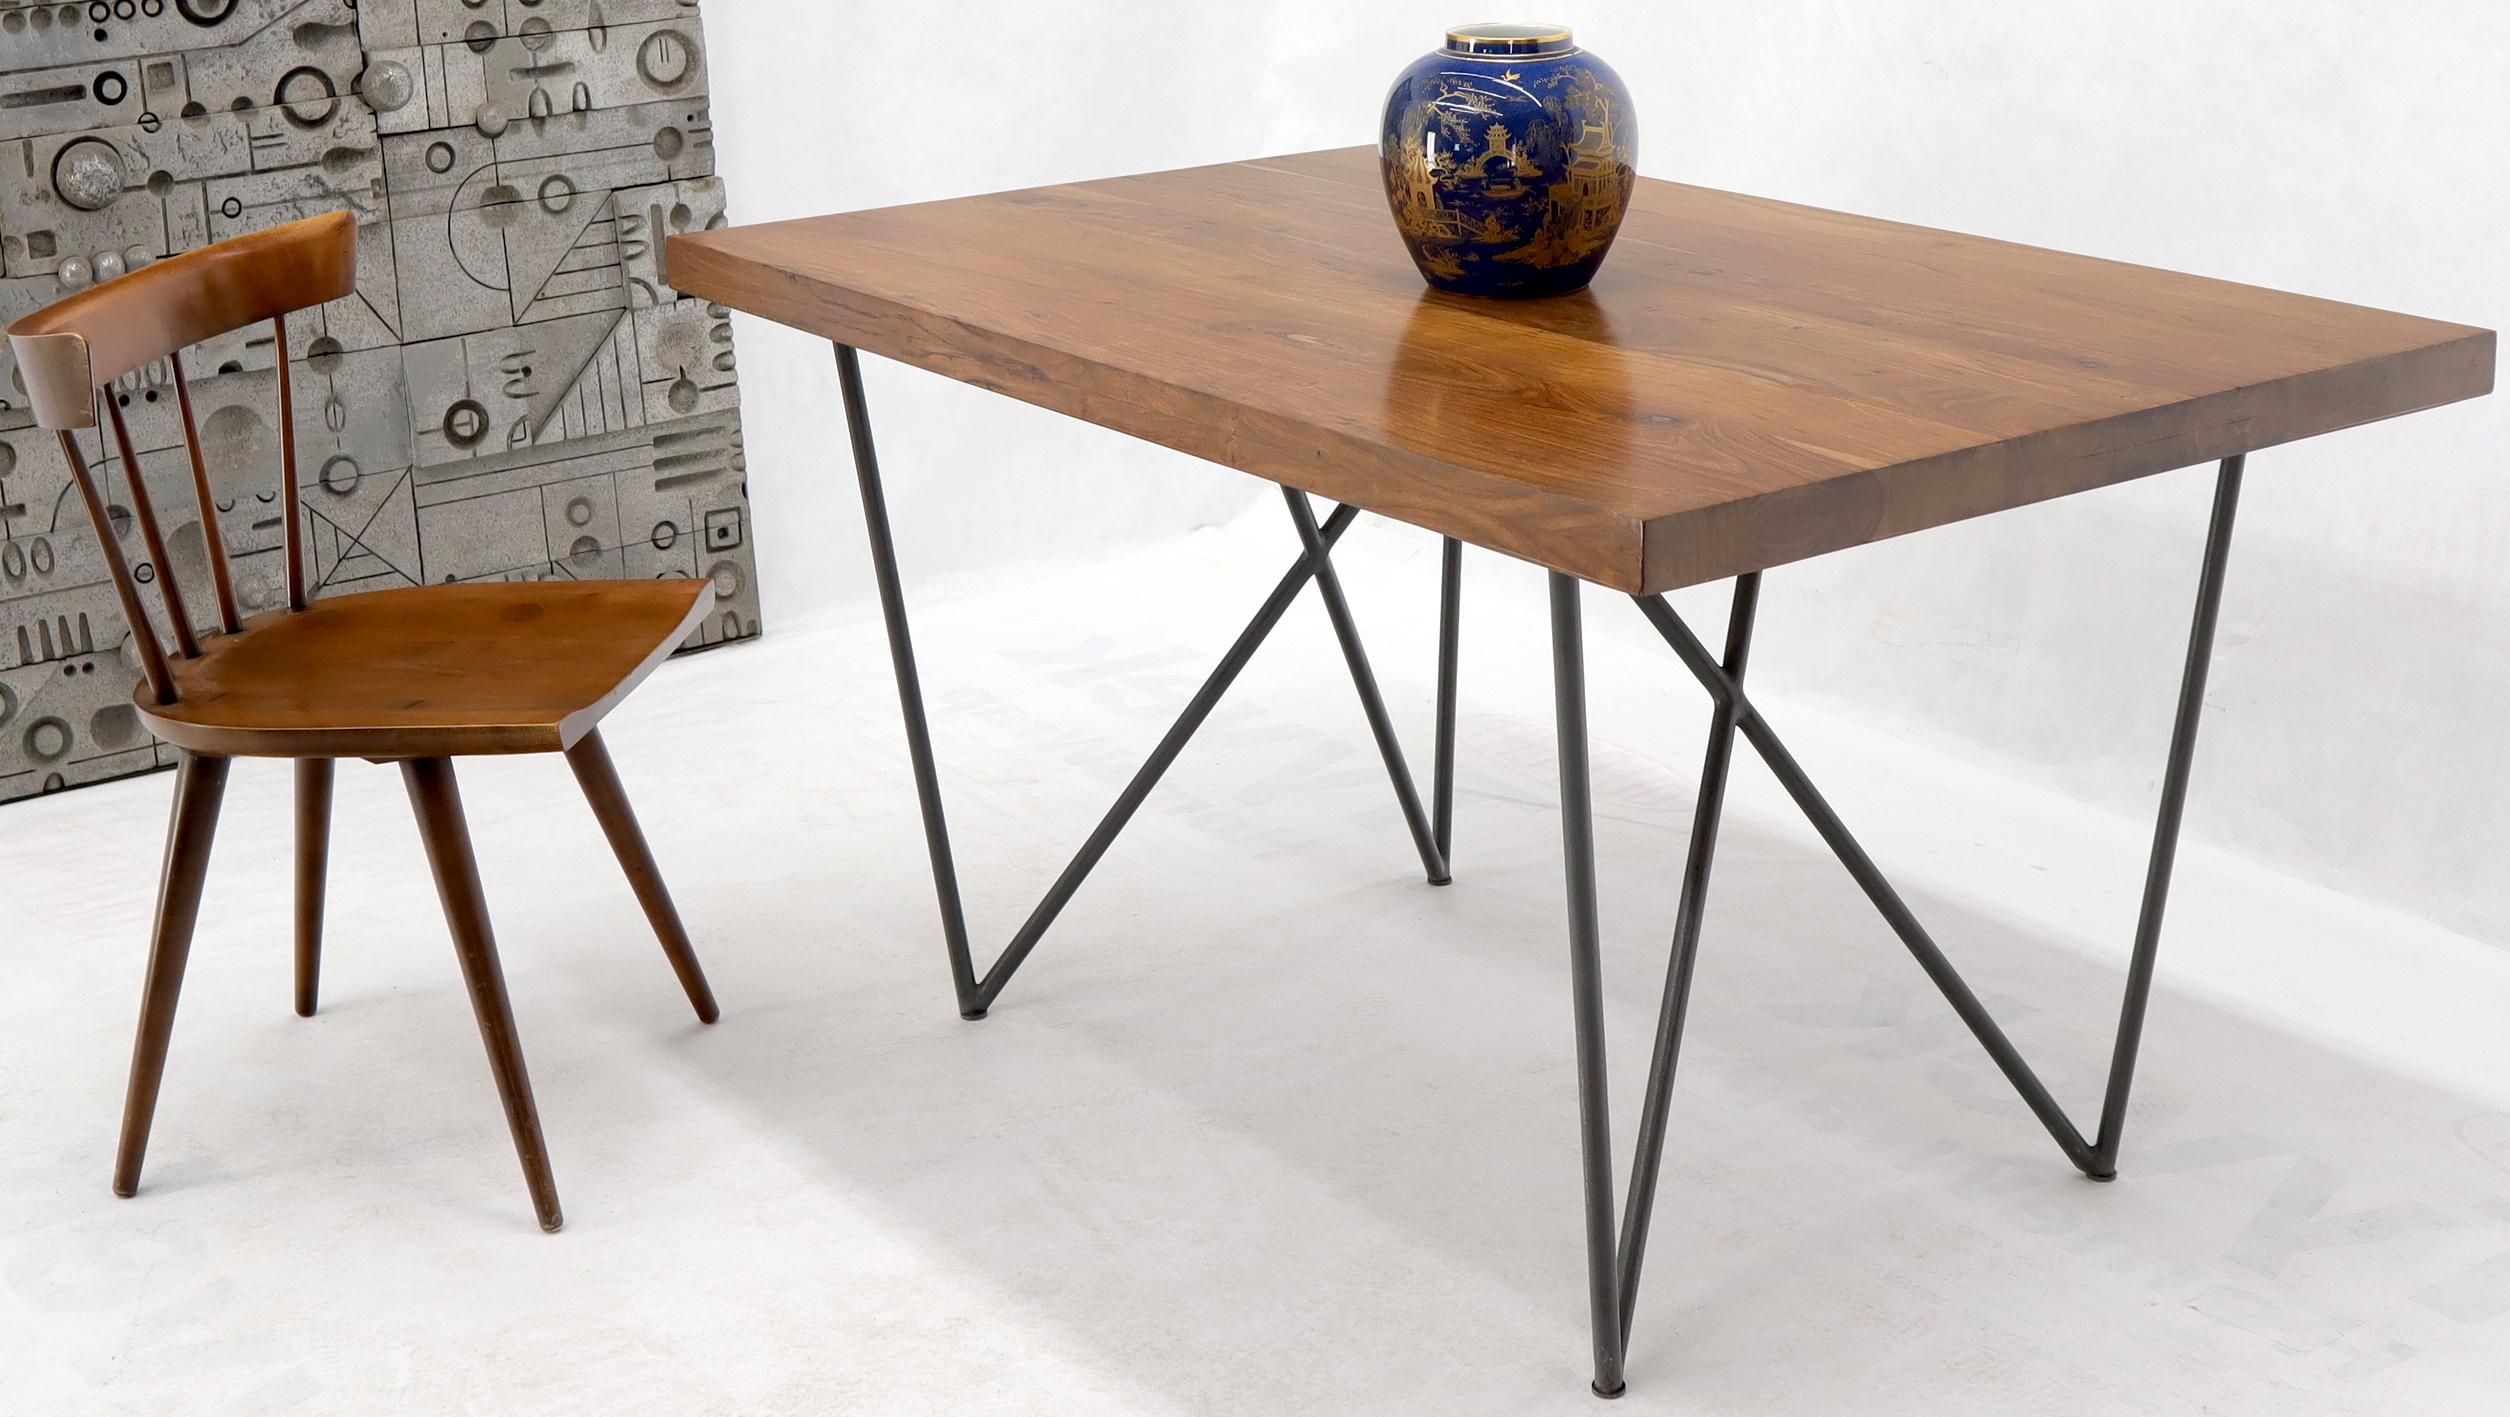 Mid-Century Modern style thick solid teak top dining table on hairpin legs. Measure: 2